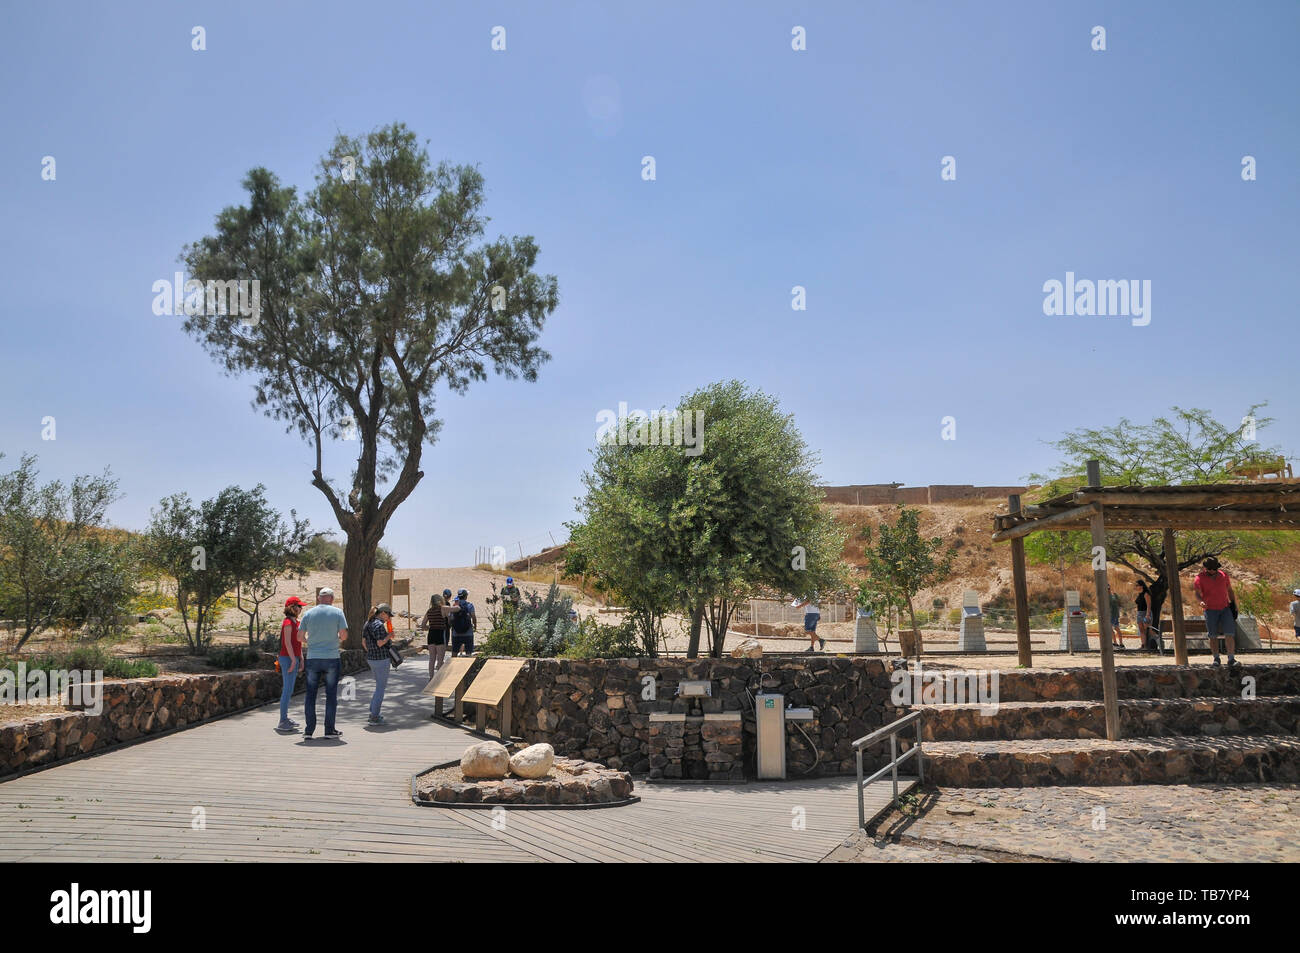 Israel, Negev, Tel Be'er Sheva believed to be the remains of the biblical town of Be'er Sheva. General view Stock Photo